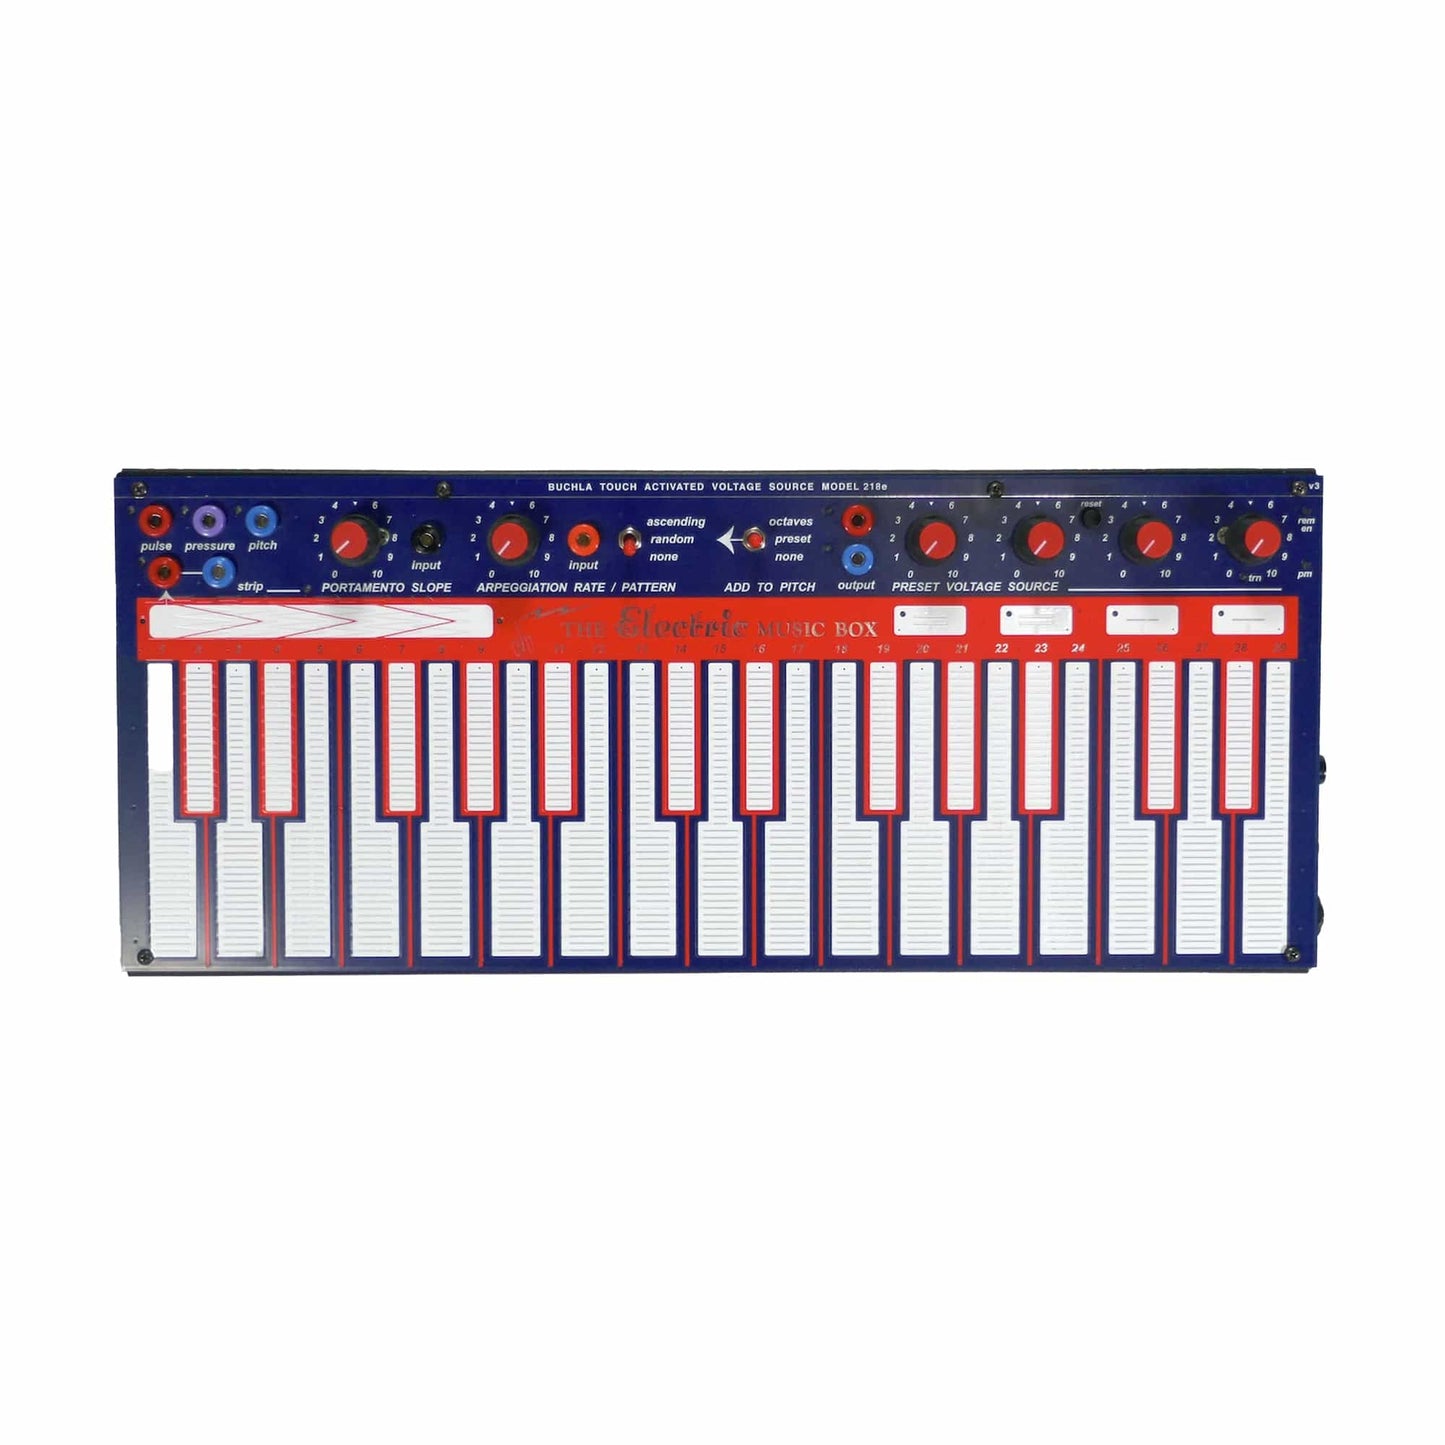 Buchla LEM 218 Touch Keyboard Controller Effects and Pedals / Controllers, Volume and Expression